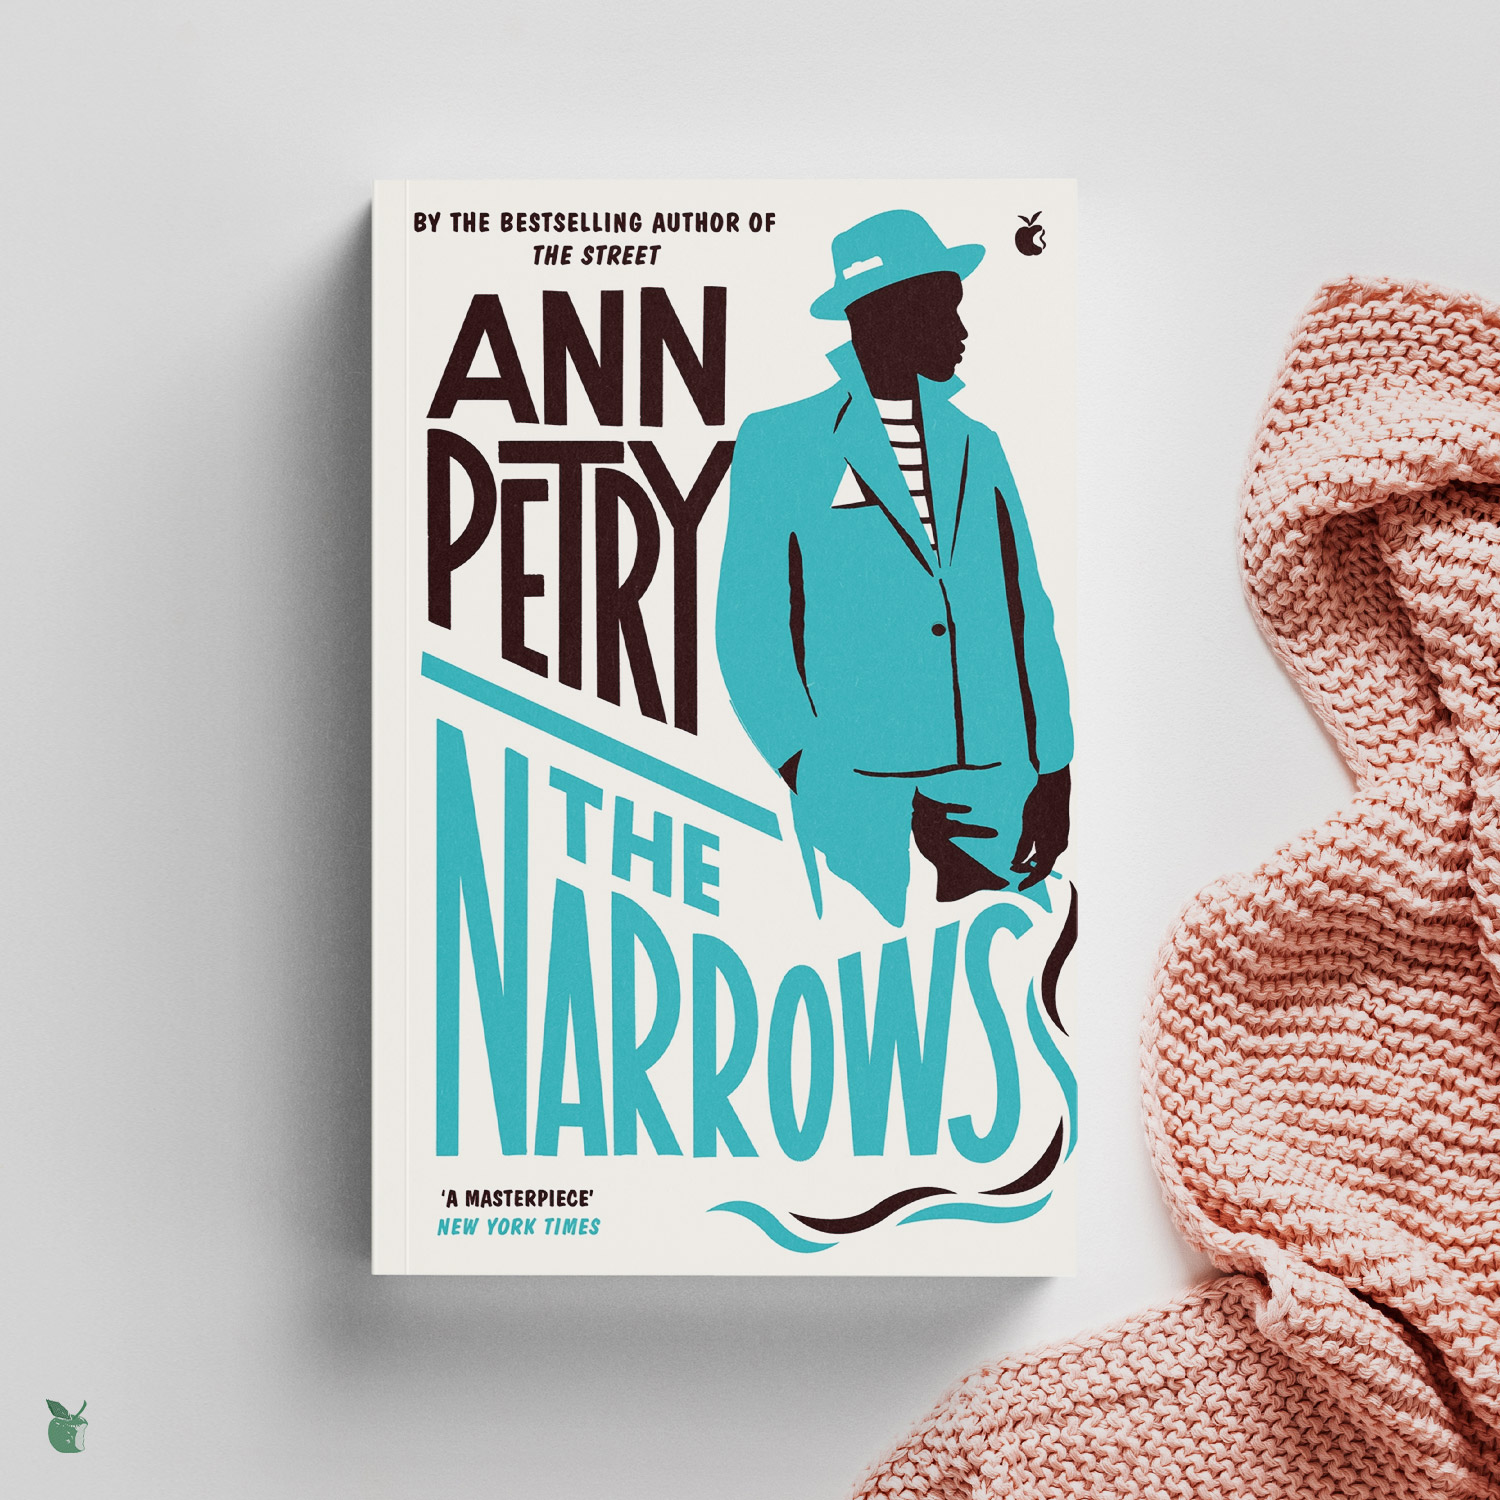 The Narrows by Ann Petry